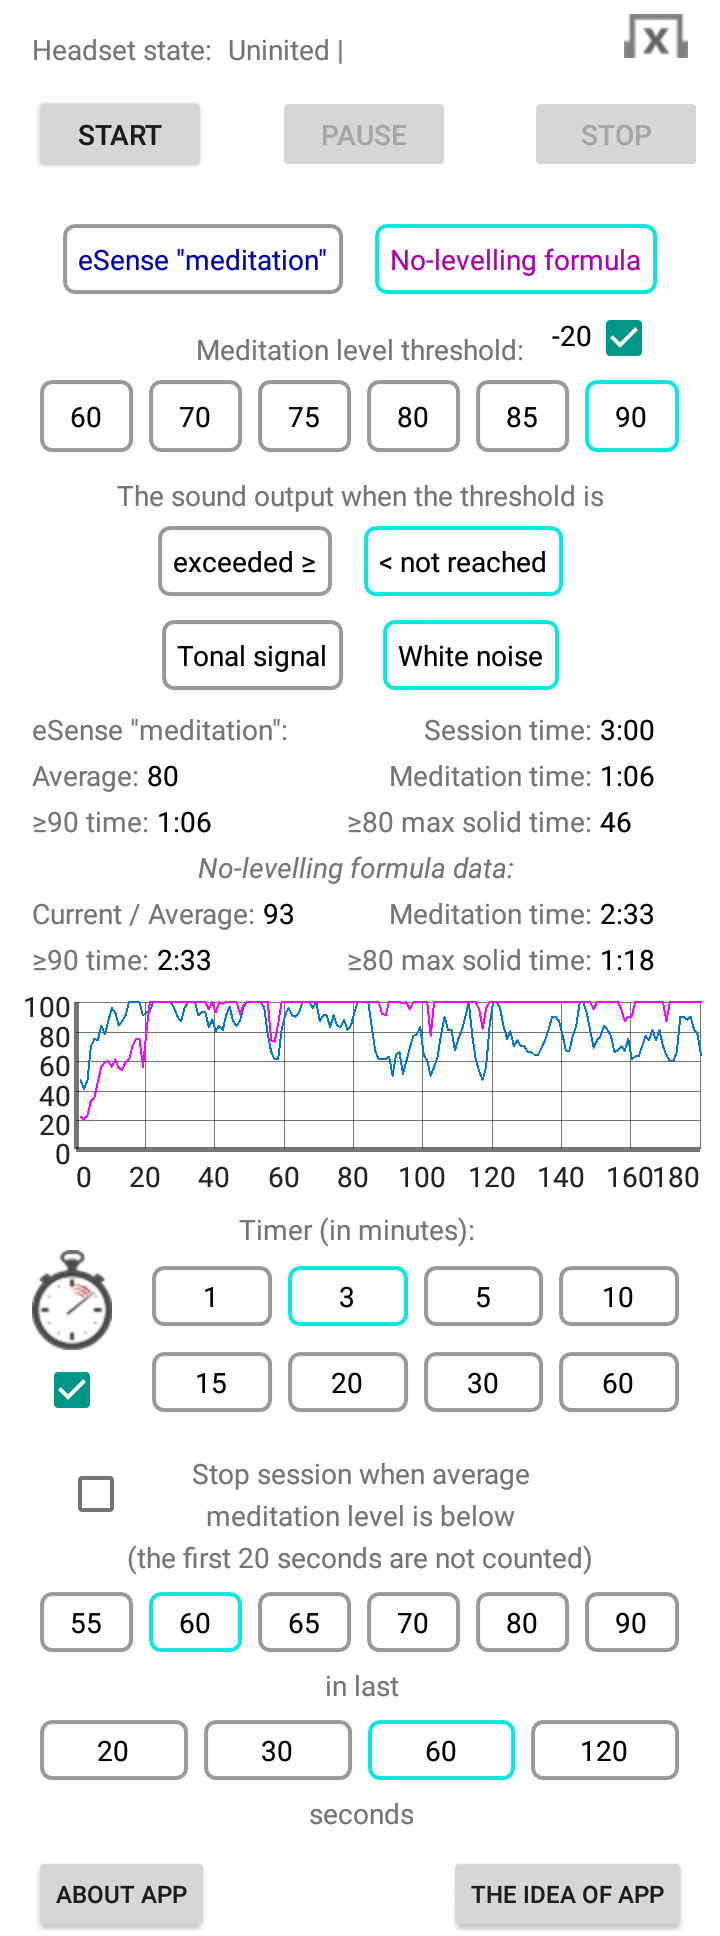 The current version of "EEG-meditation" application is 1.6.1